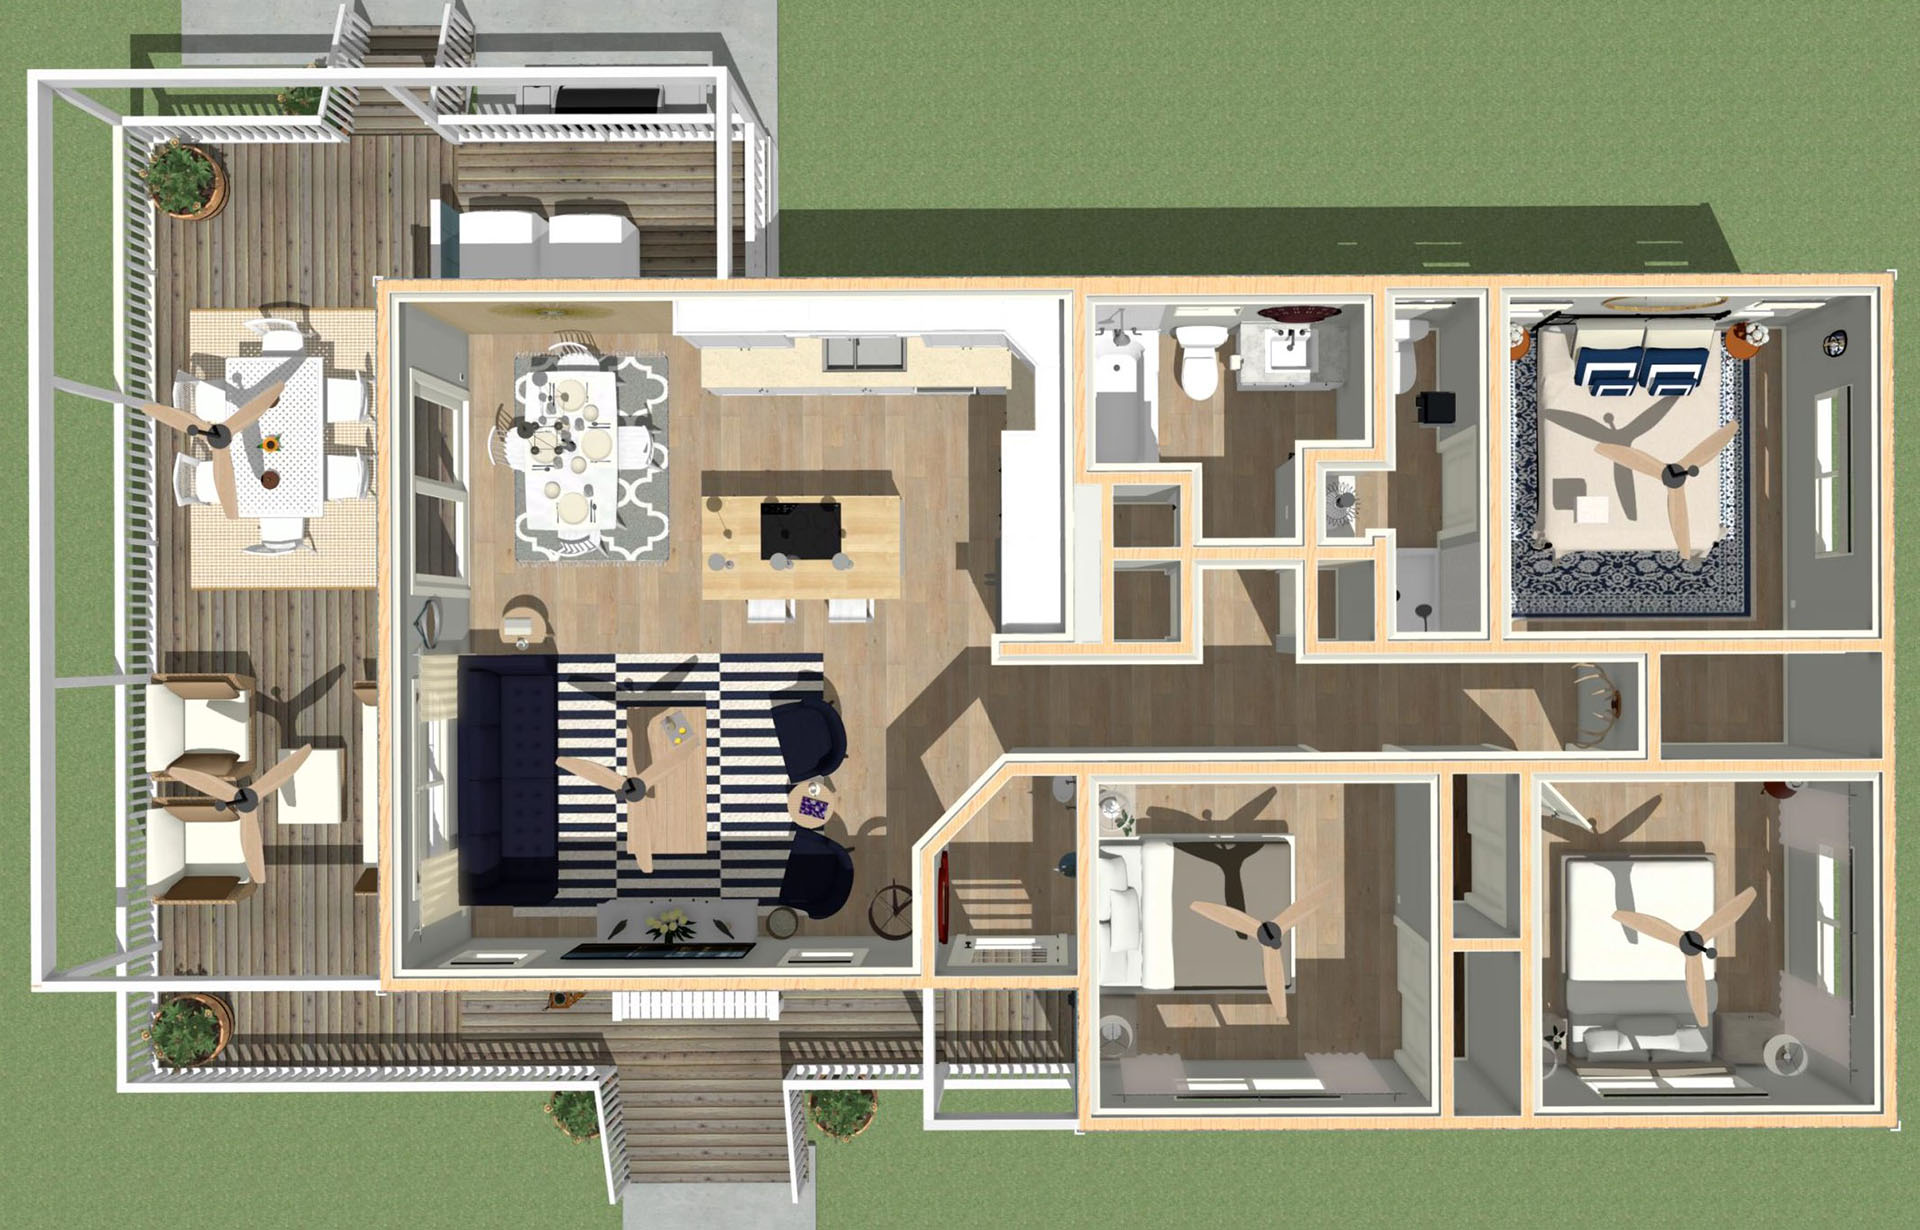 Aerial view of the all the rooms in the entire house